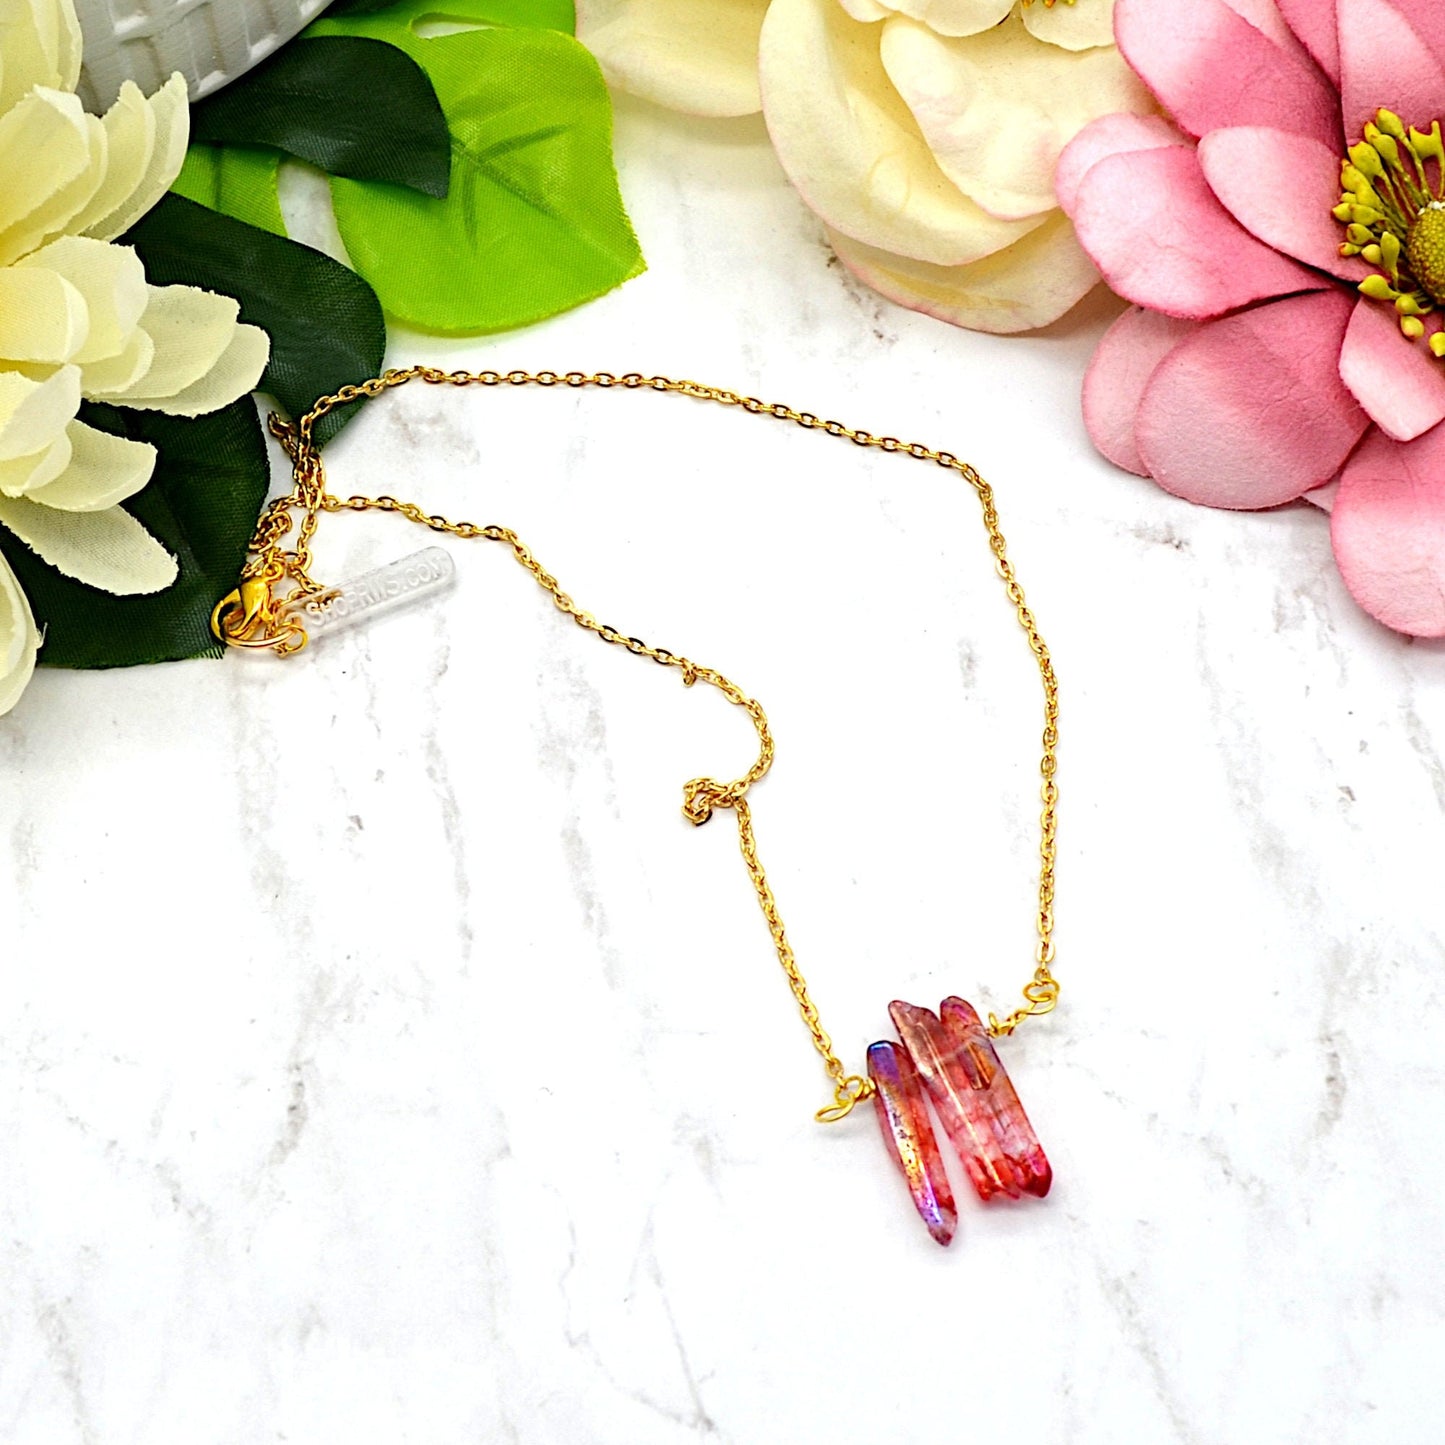 SALE Pretty and Polished Rose Quartz Couture Necklace